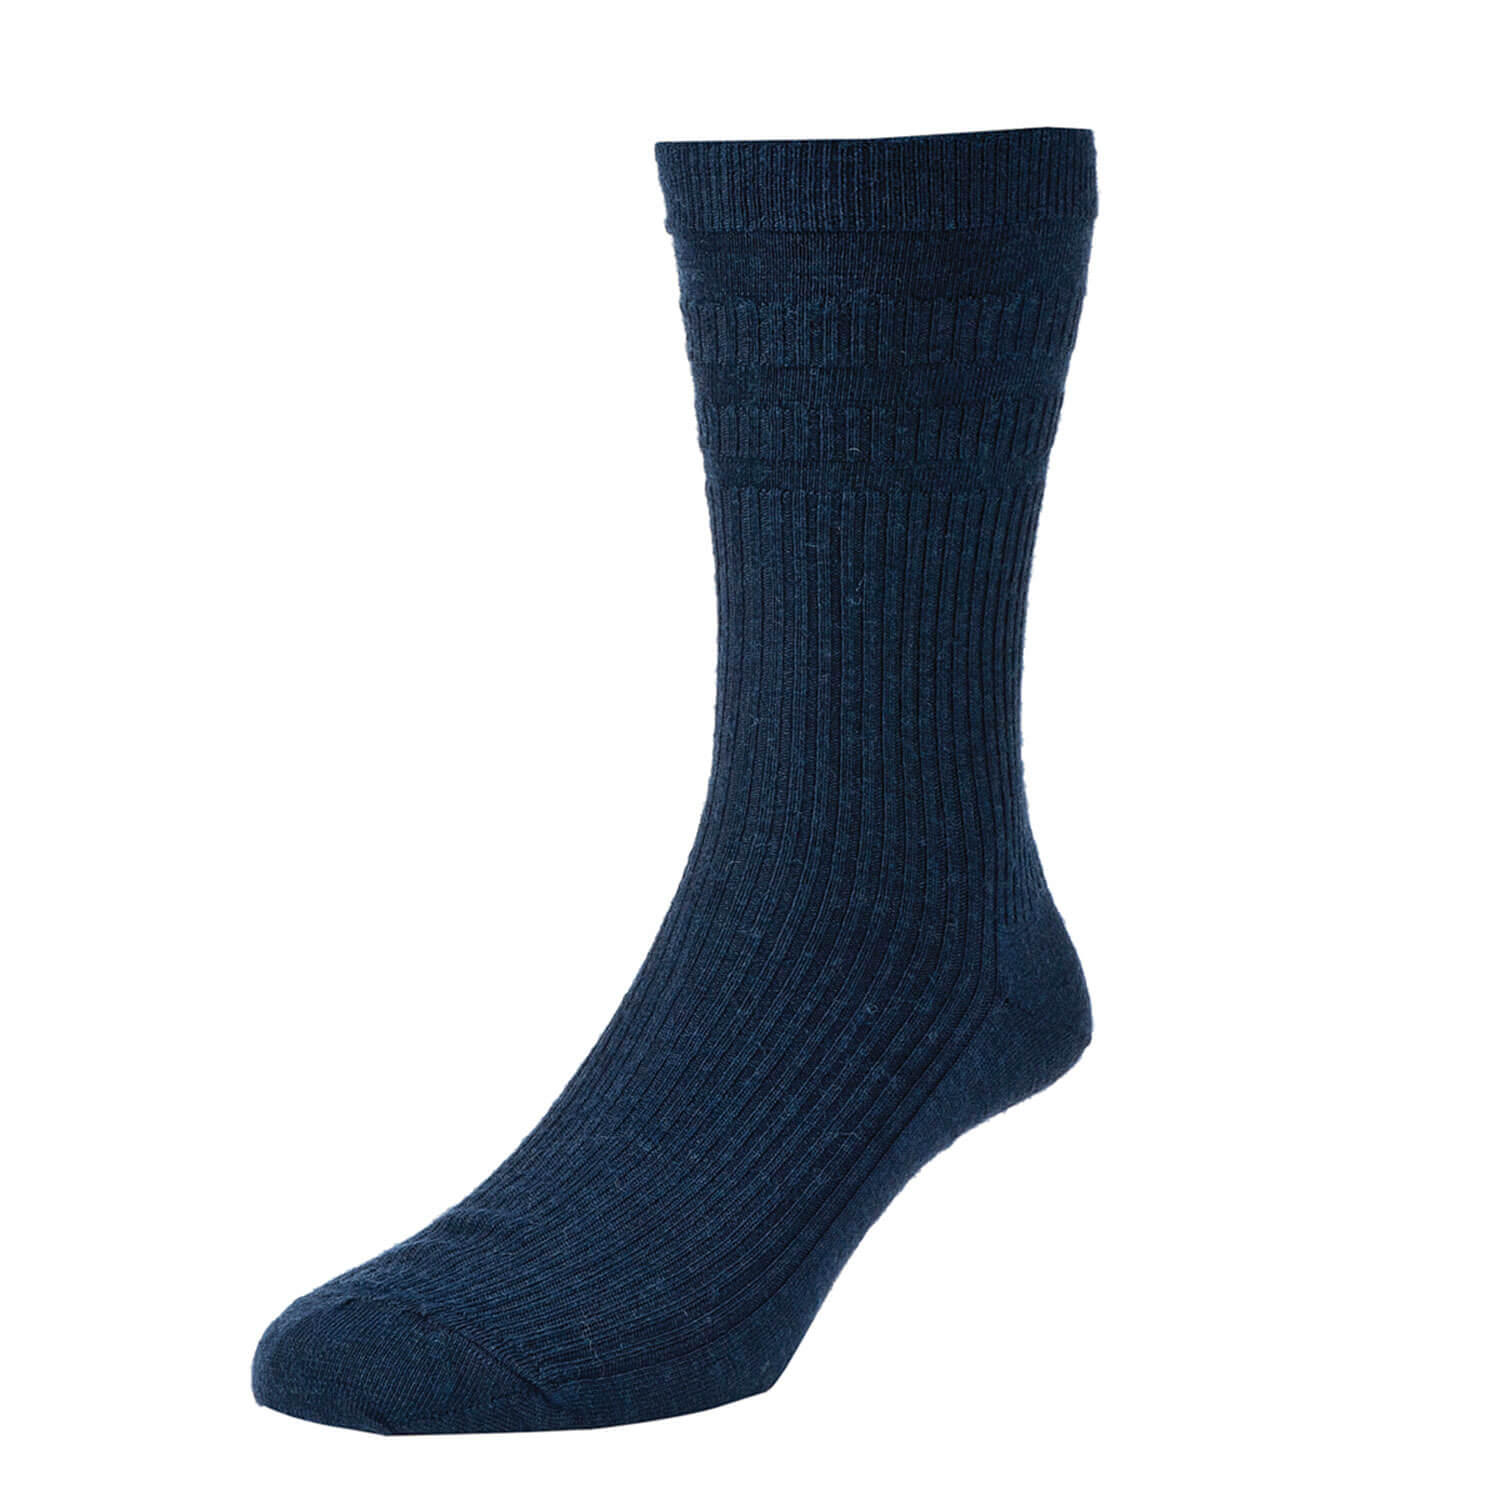 Hj Hall Softop Cotton Rich Diabetic Socks- Navy 1 Shaws Department Stores